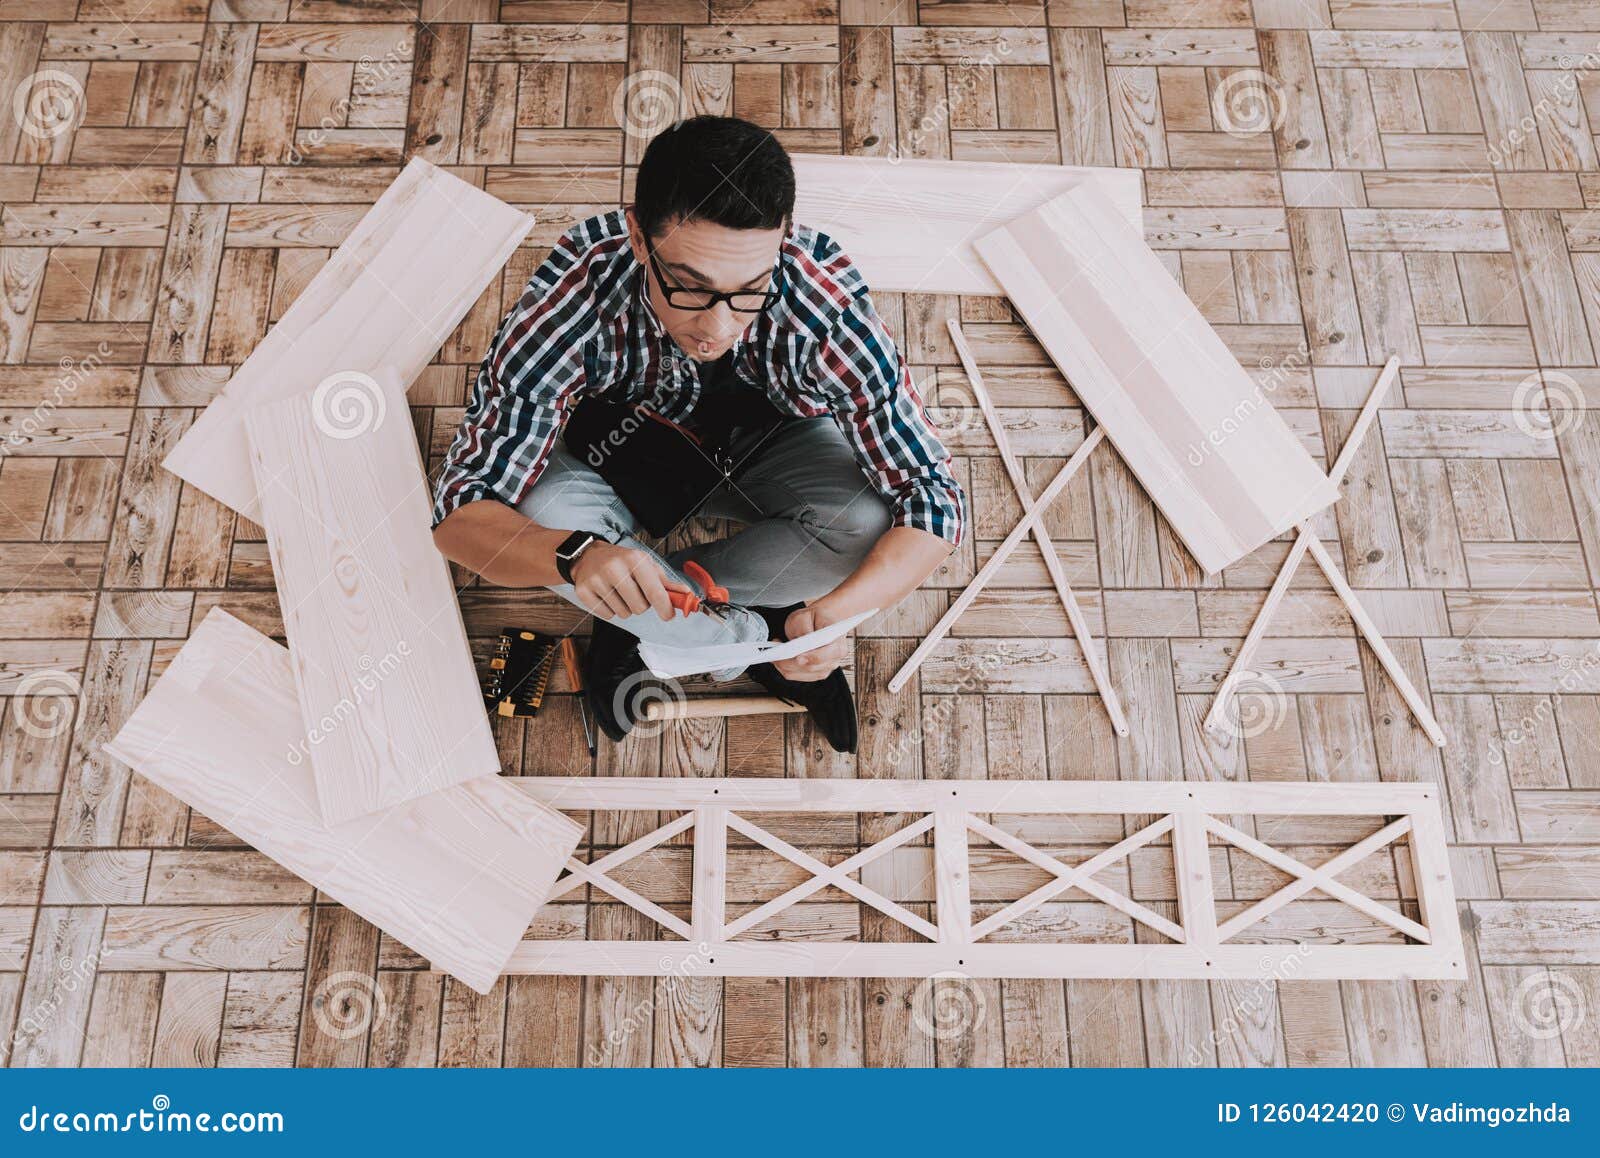 Young Man Assembling Wooden Bookshelf At Home Stock Photo Image